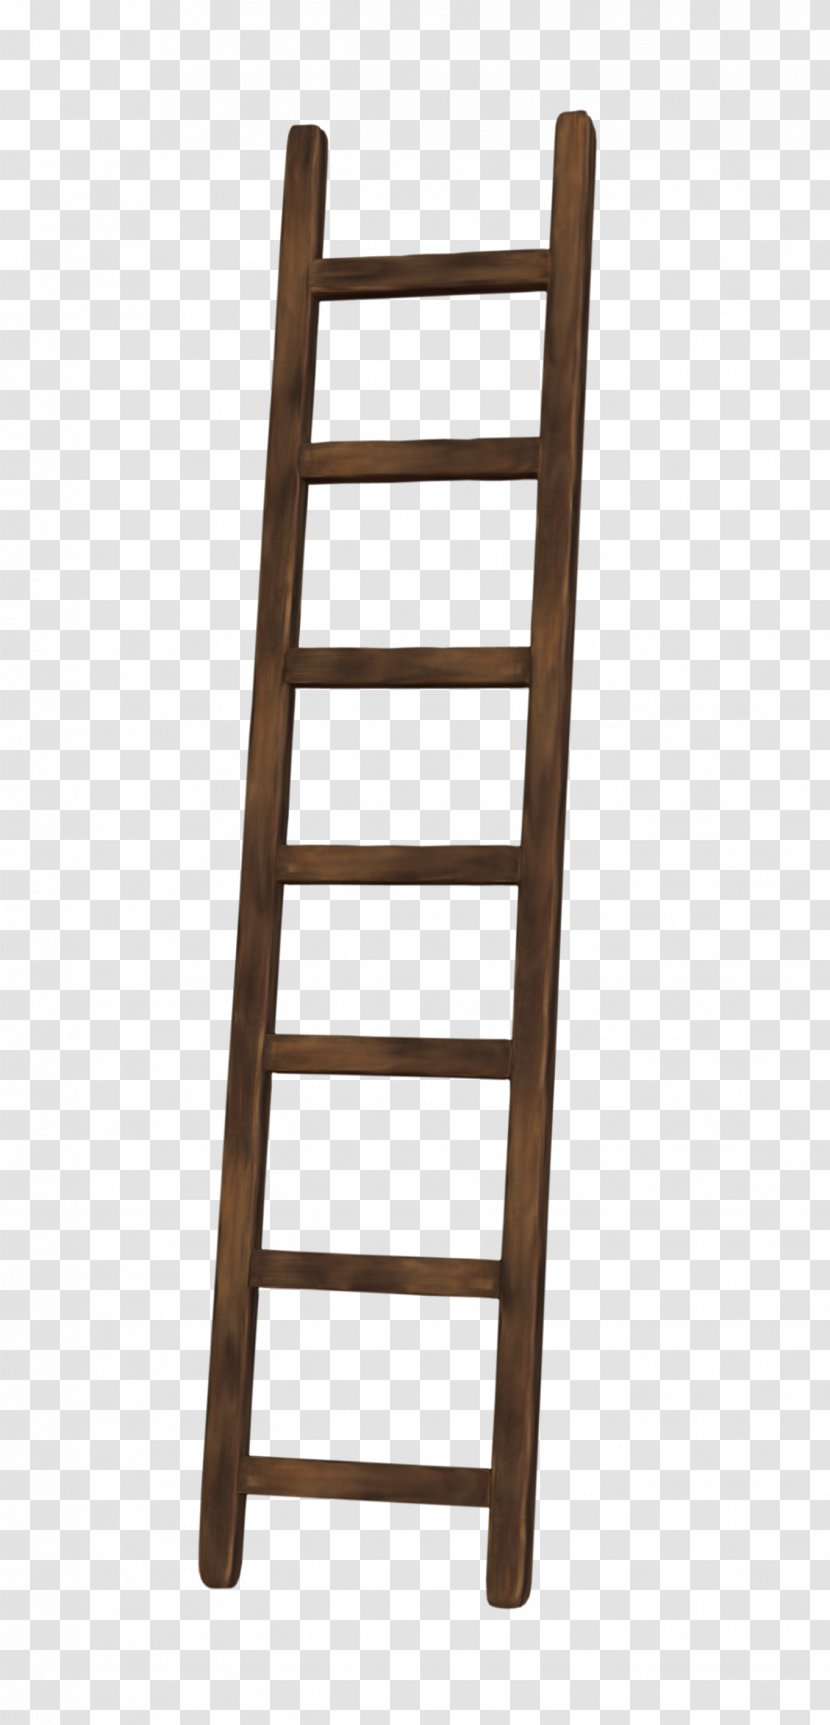 Ladder Wood Stairs Stair Riser Transparent PNG